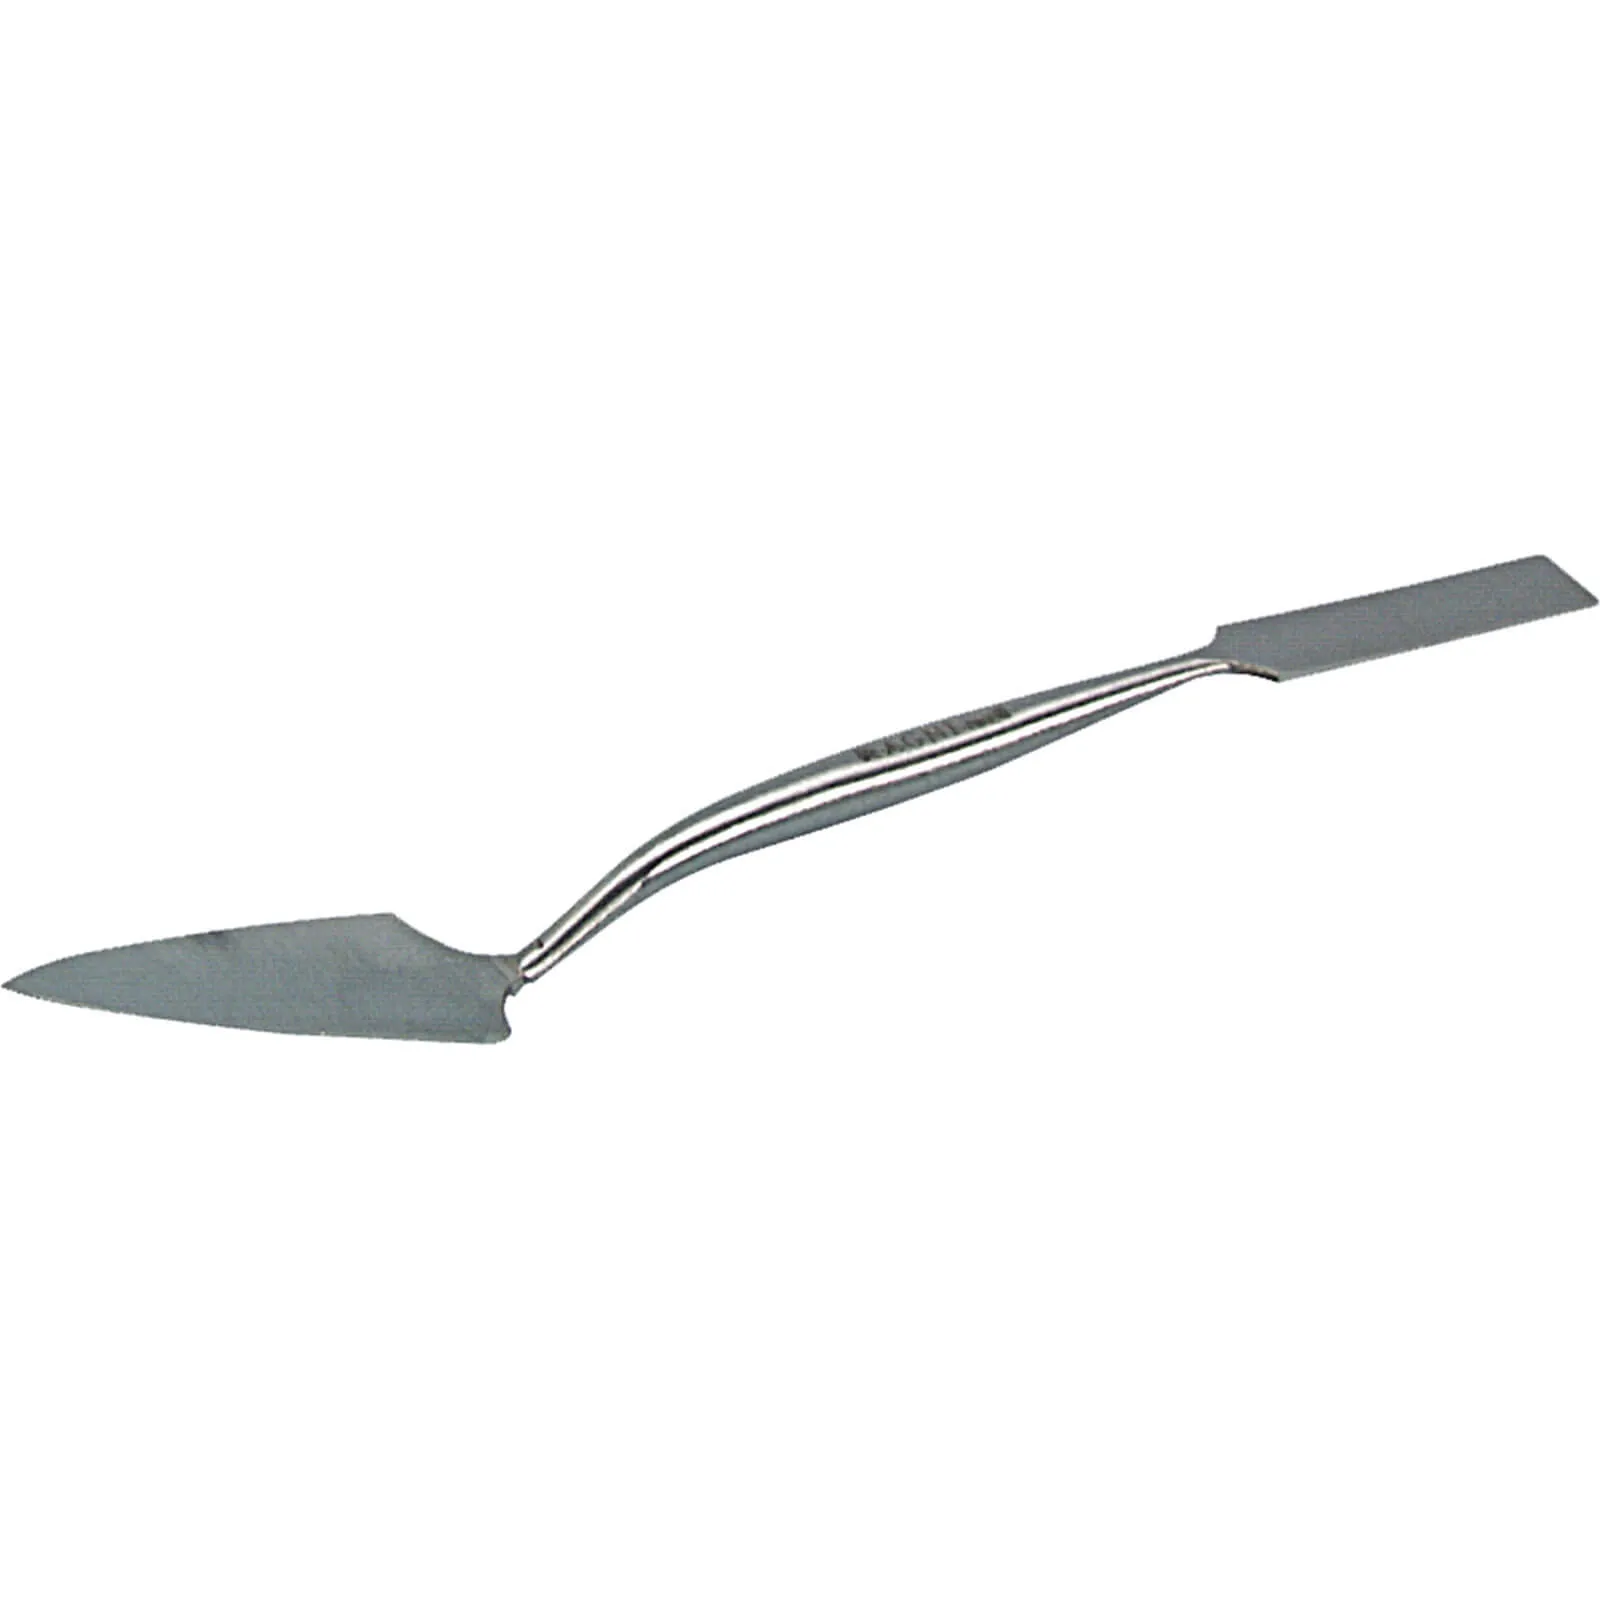 Ragni Trowel and Square Small Tool - 1/2", 9"